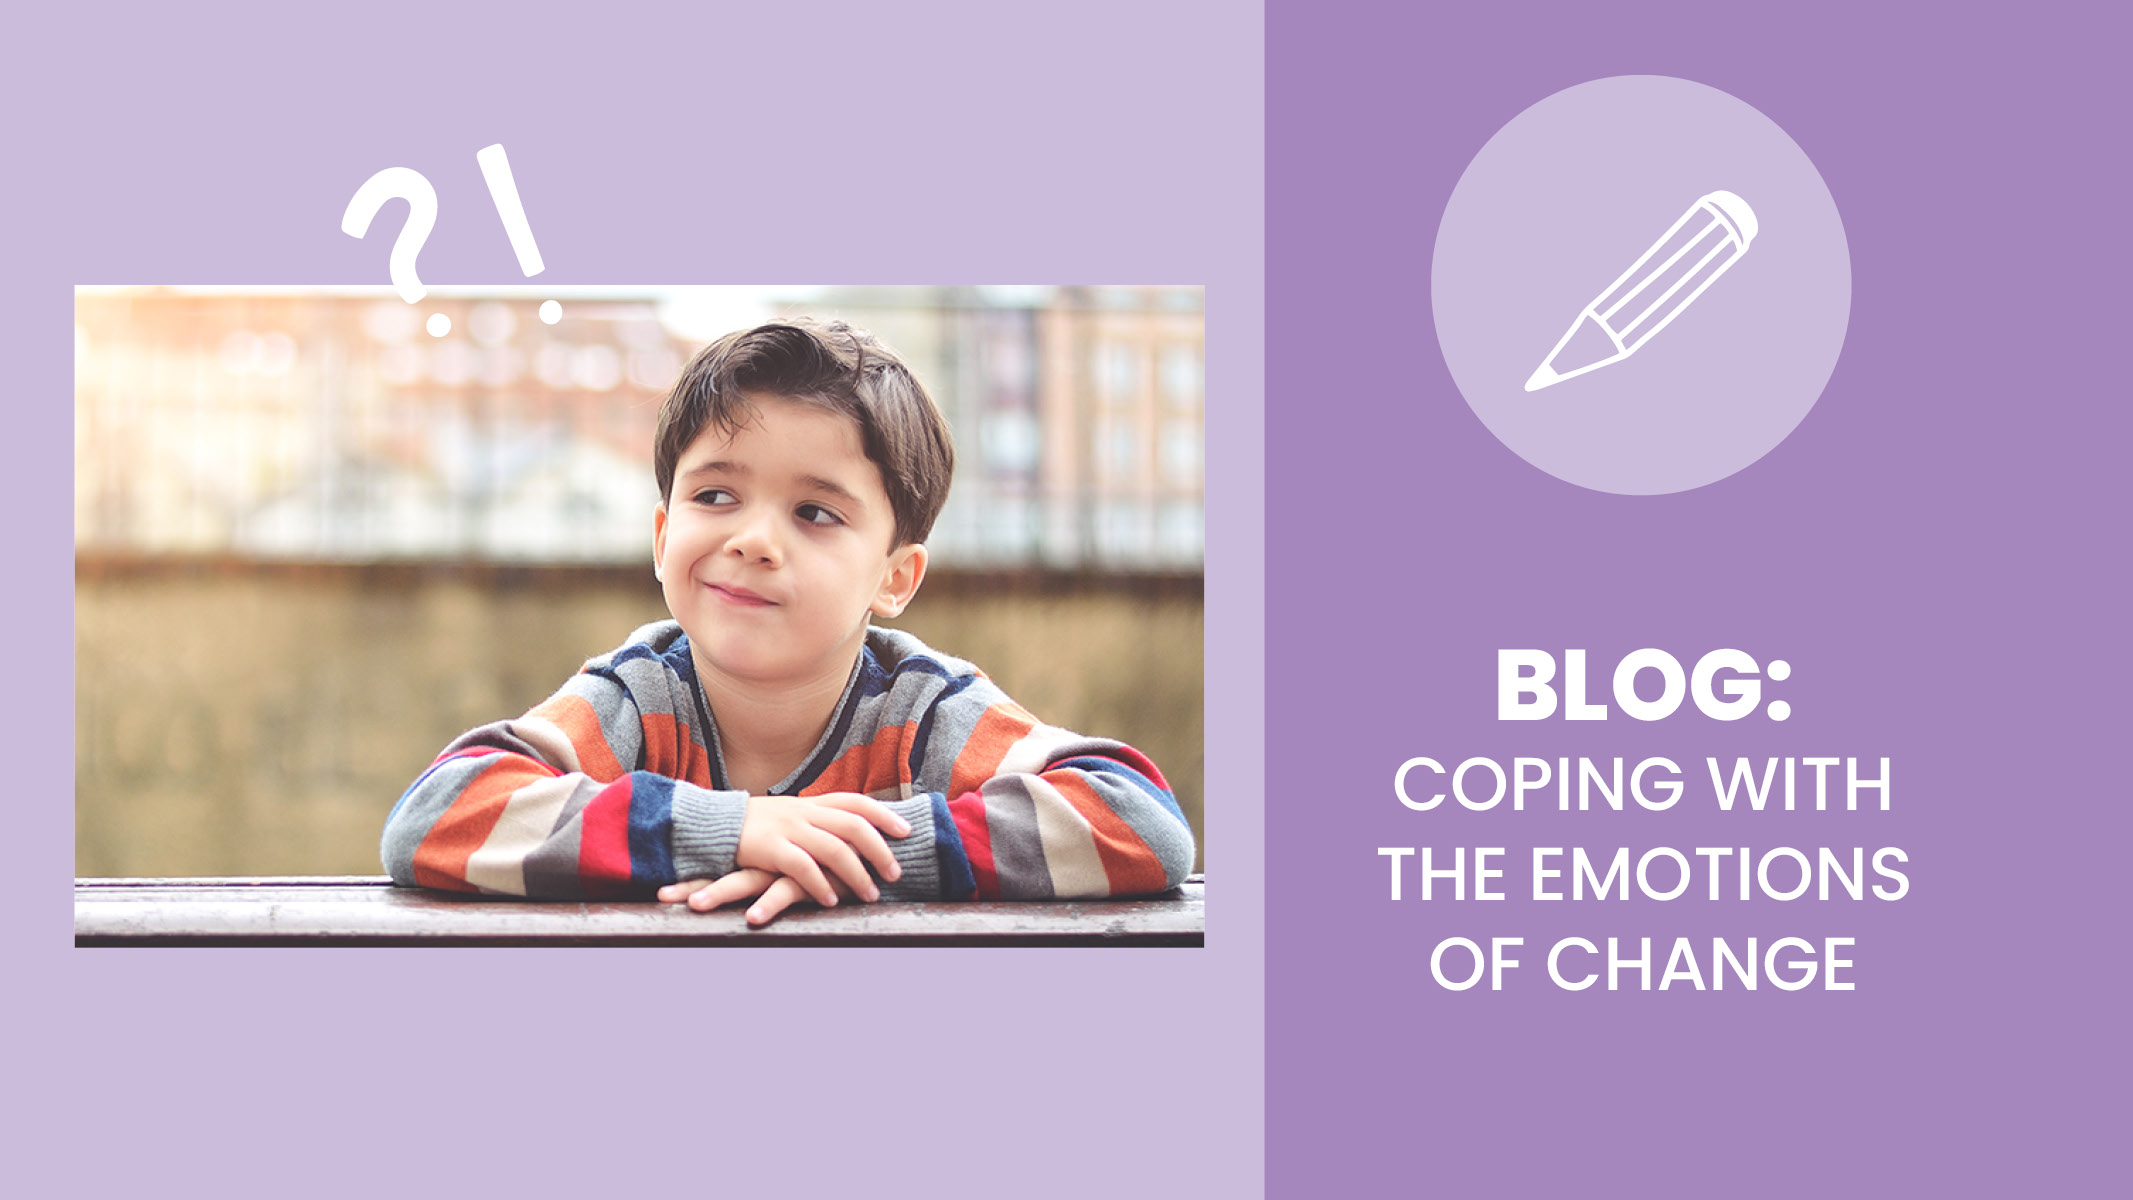 Young child, boy, sits outside and thinks about change and emotions